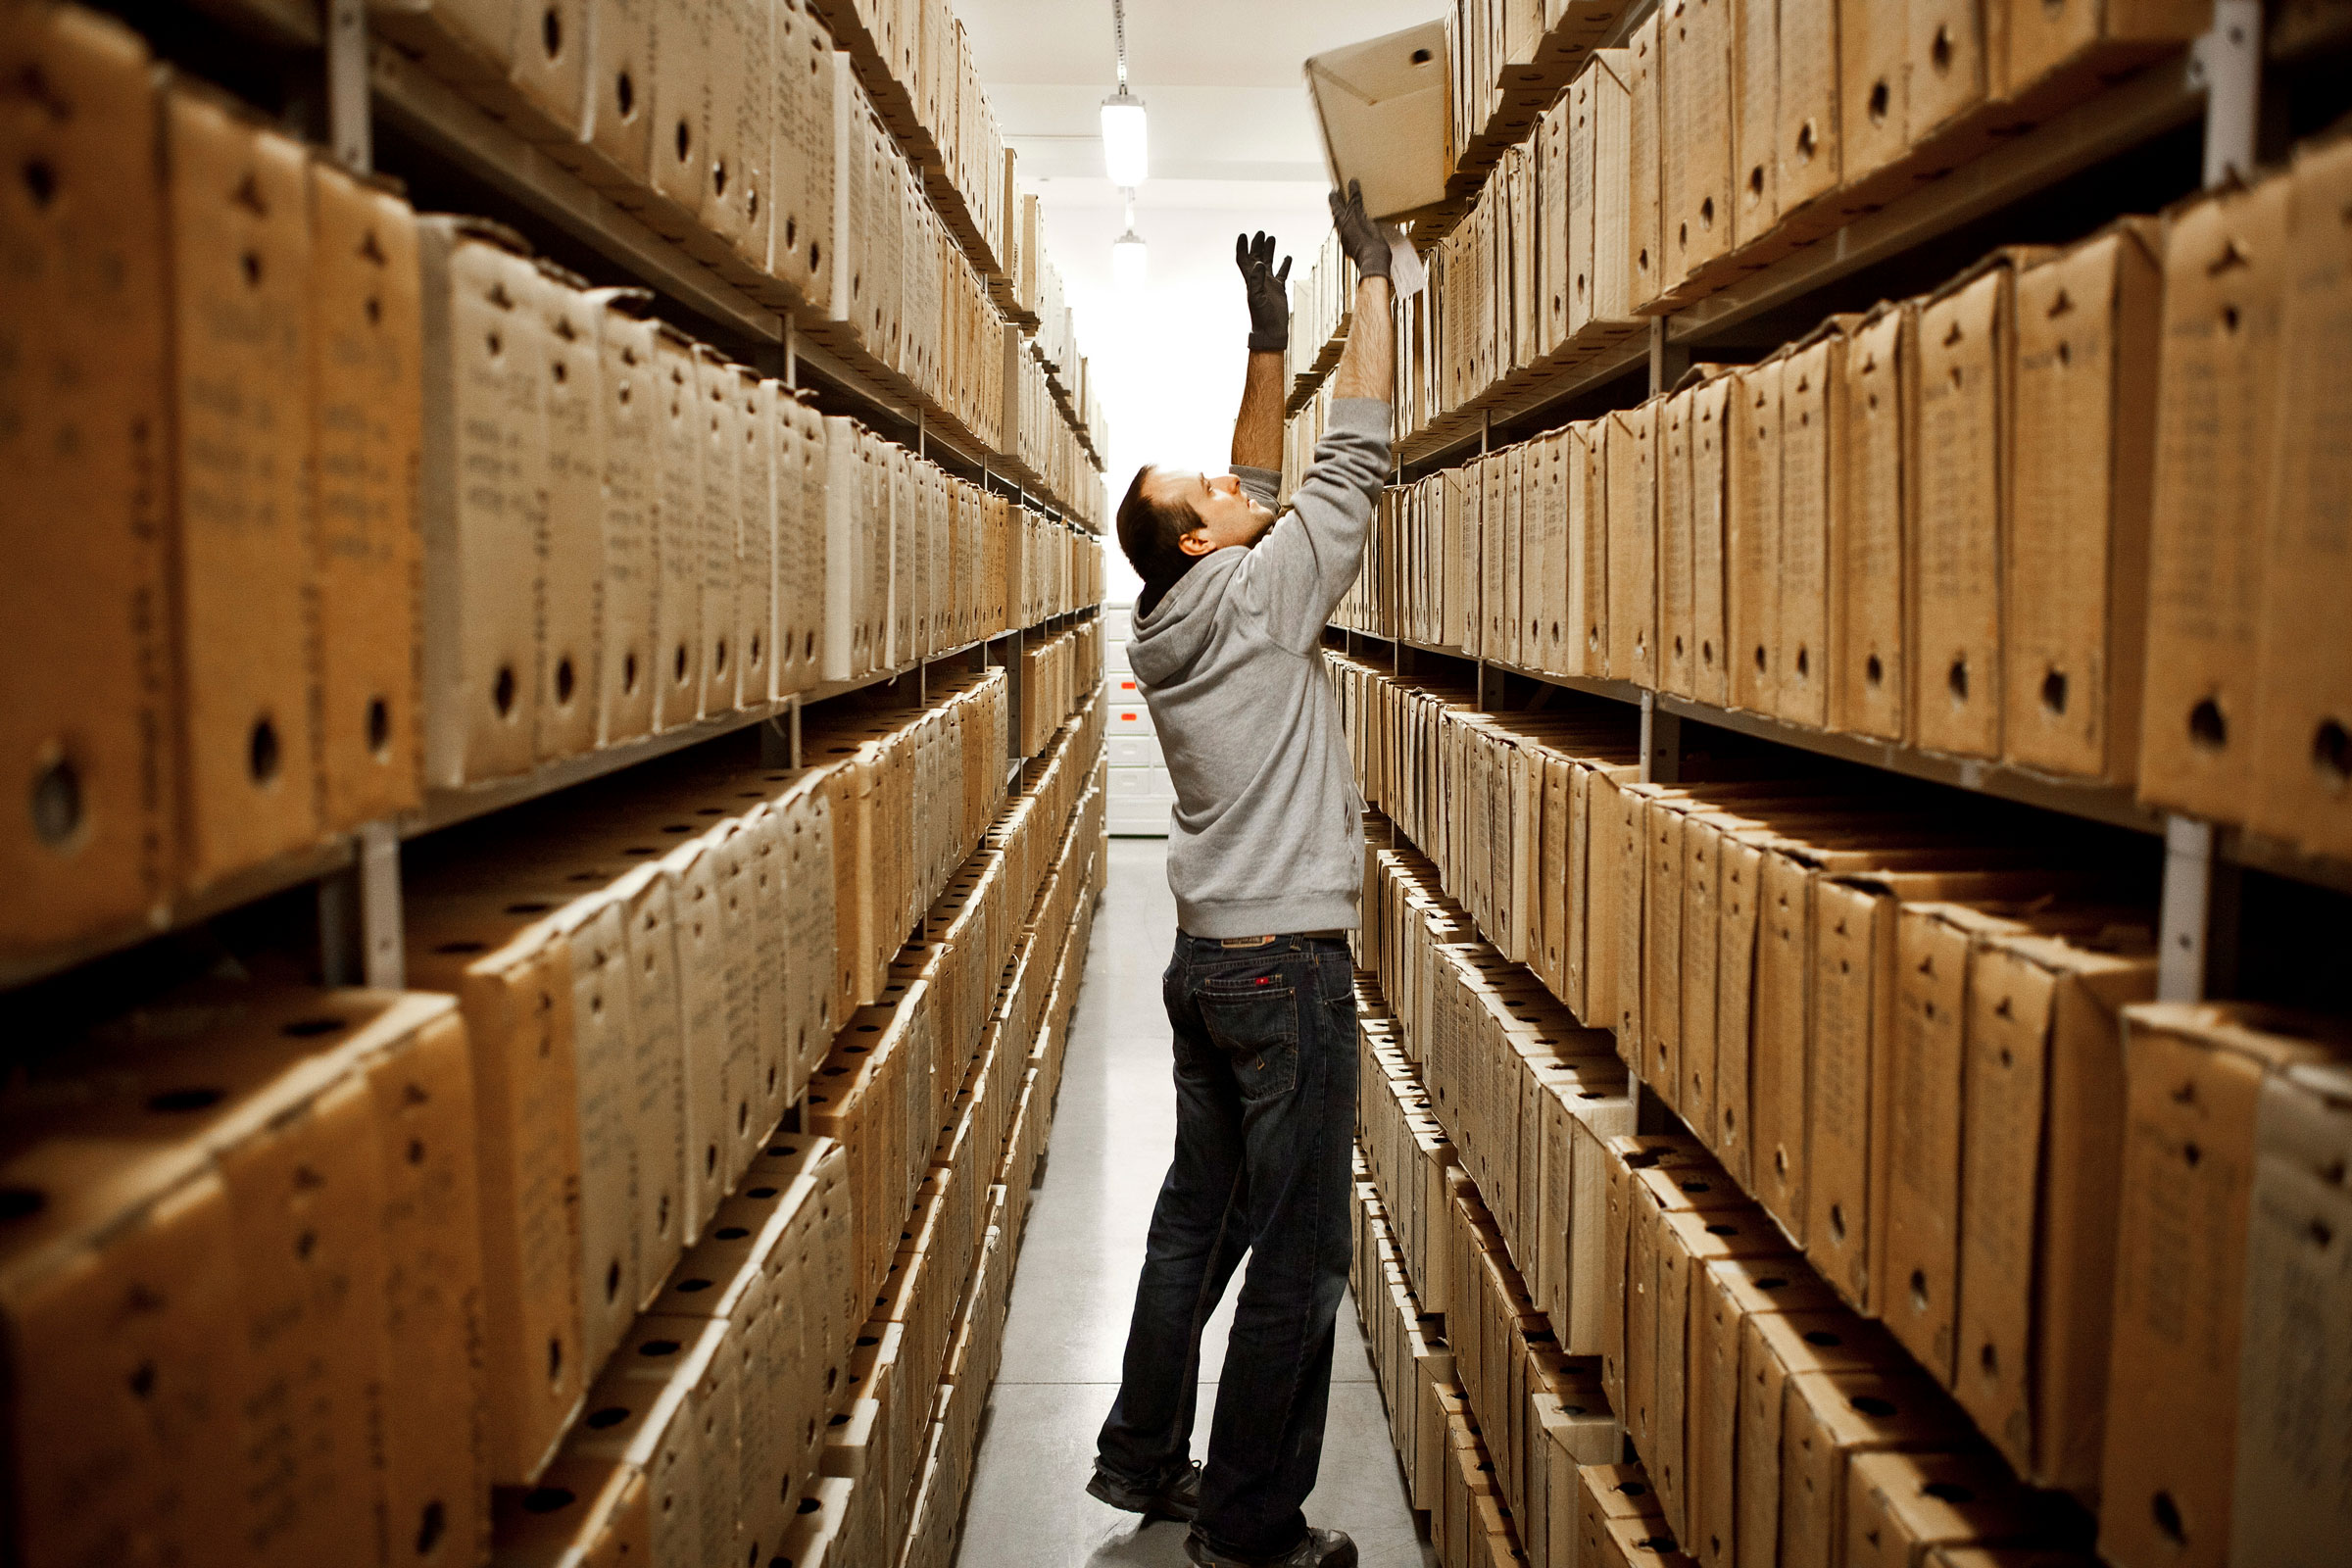 Files relating to collaborator​s and agents of the secret pol​ice from Poland's communist er​a are stored on shelves at the​ Instytut Pamieci Narodowej (I​PN), the Institute of Nationa​l Rememberance, in Warsaw. (Piotr Malecki—Panos Pictures/R​edux)